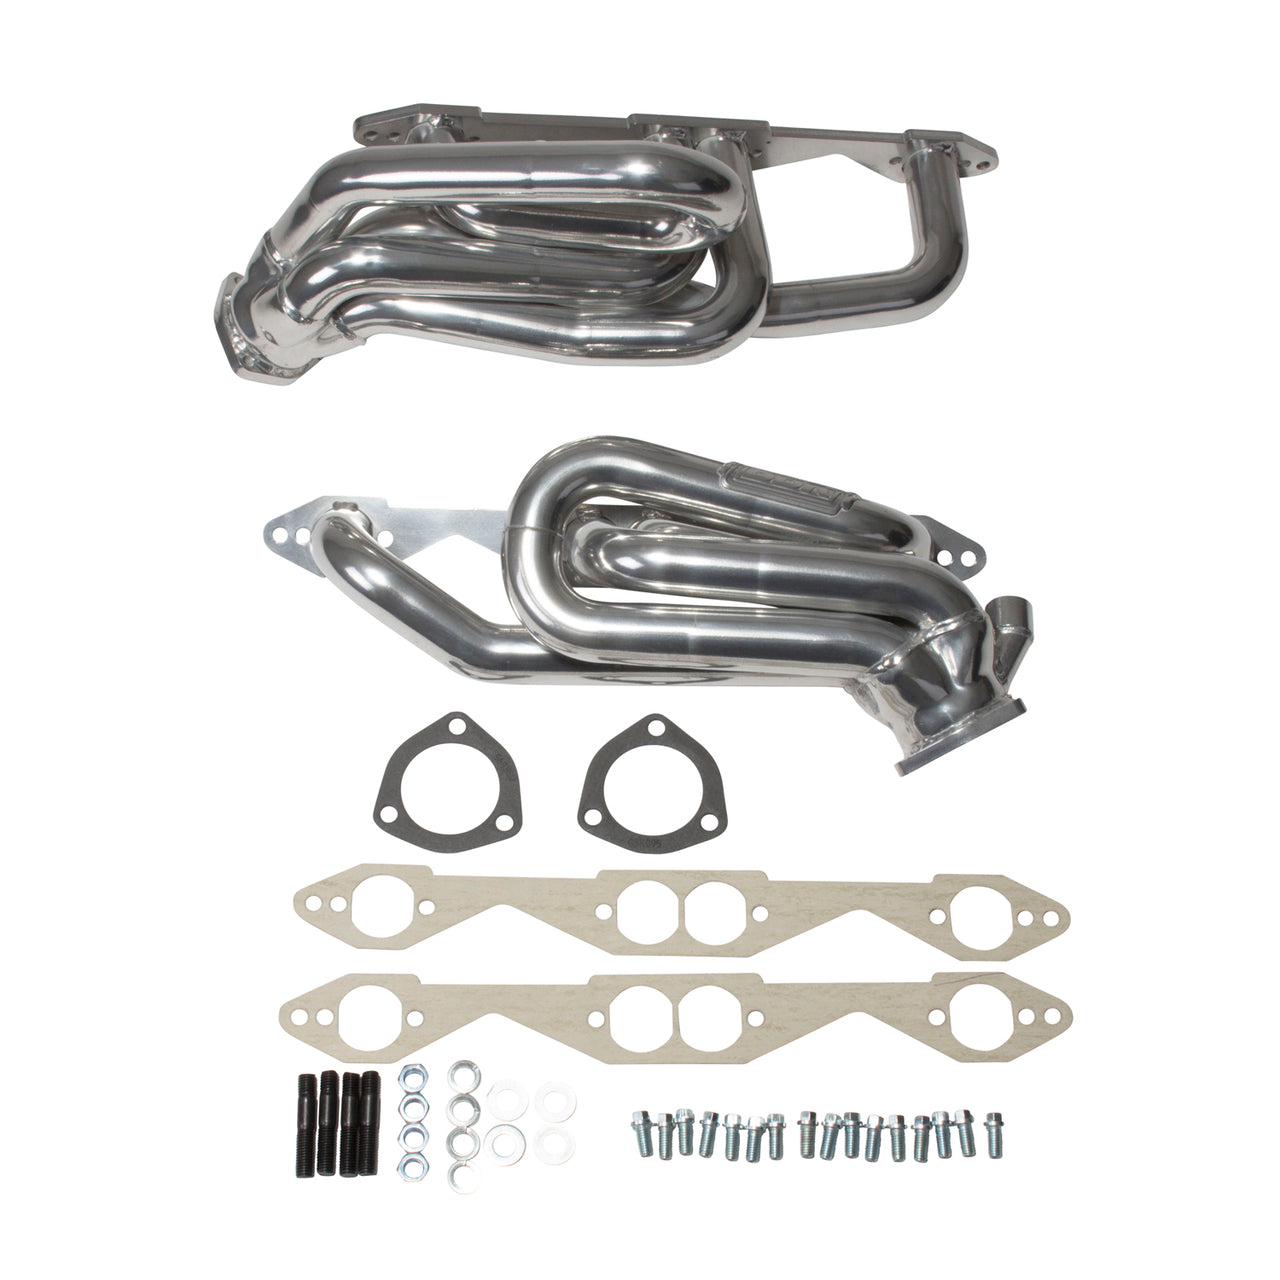 1996-1999 GM TRUCK/SUV 5.0/5.7L 1-5/8 SHORTY HEADERS (POLISHED SILVER CERAMIC)